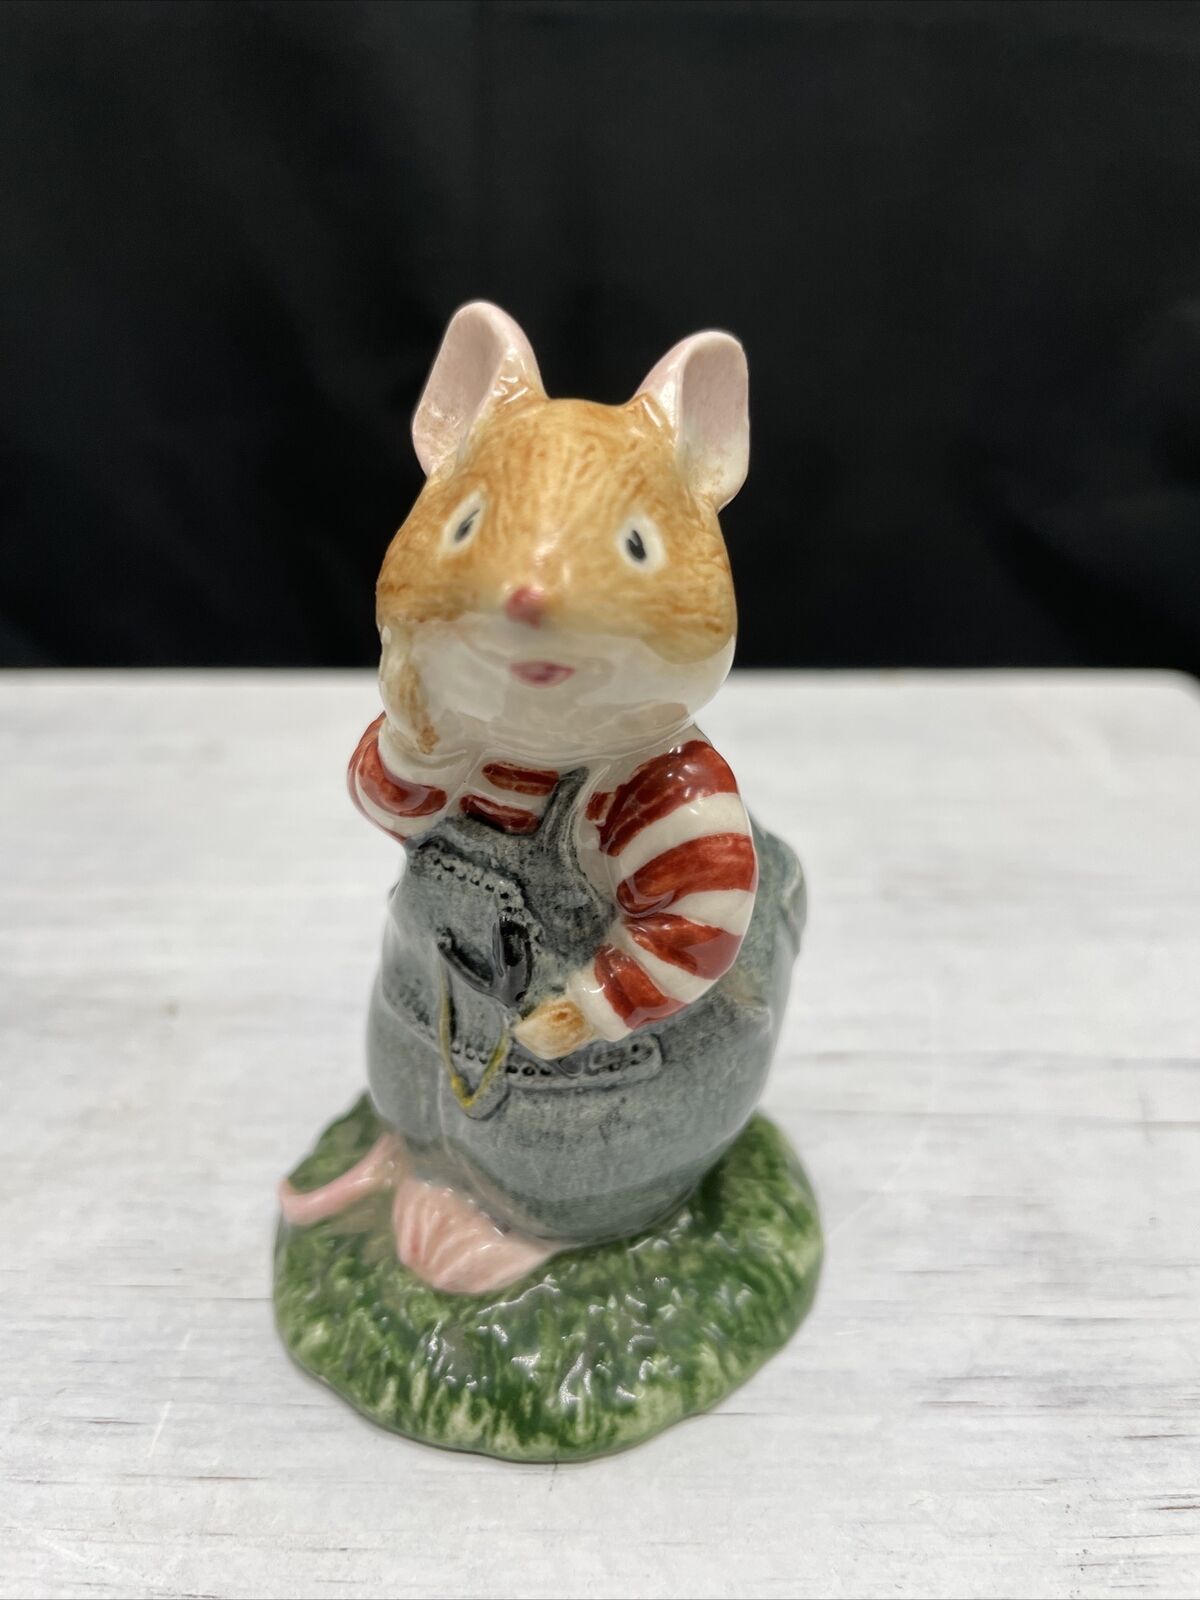 1982 Royal Doulton Brambly Hedge Collection “Wilfred Toadflax” Figurine D. BH 7